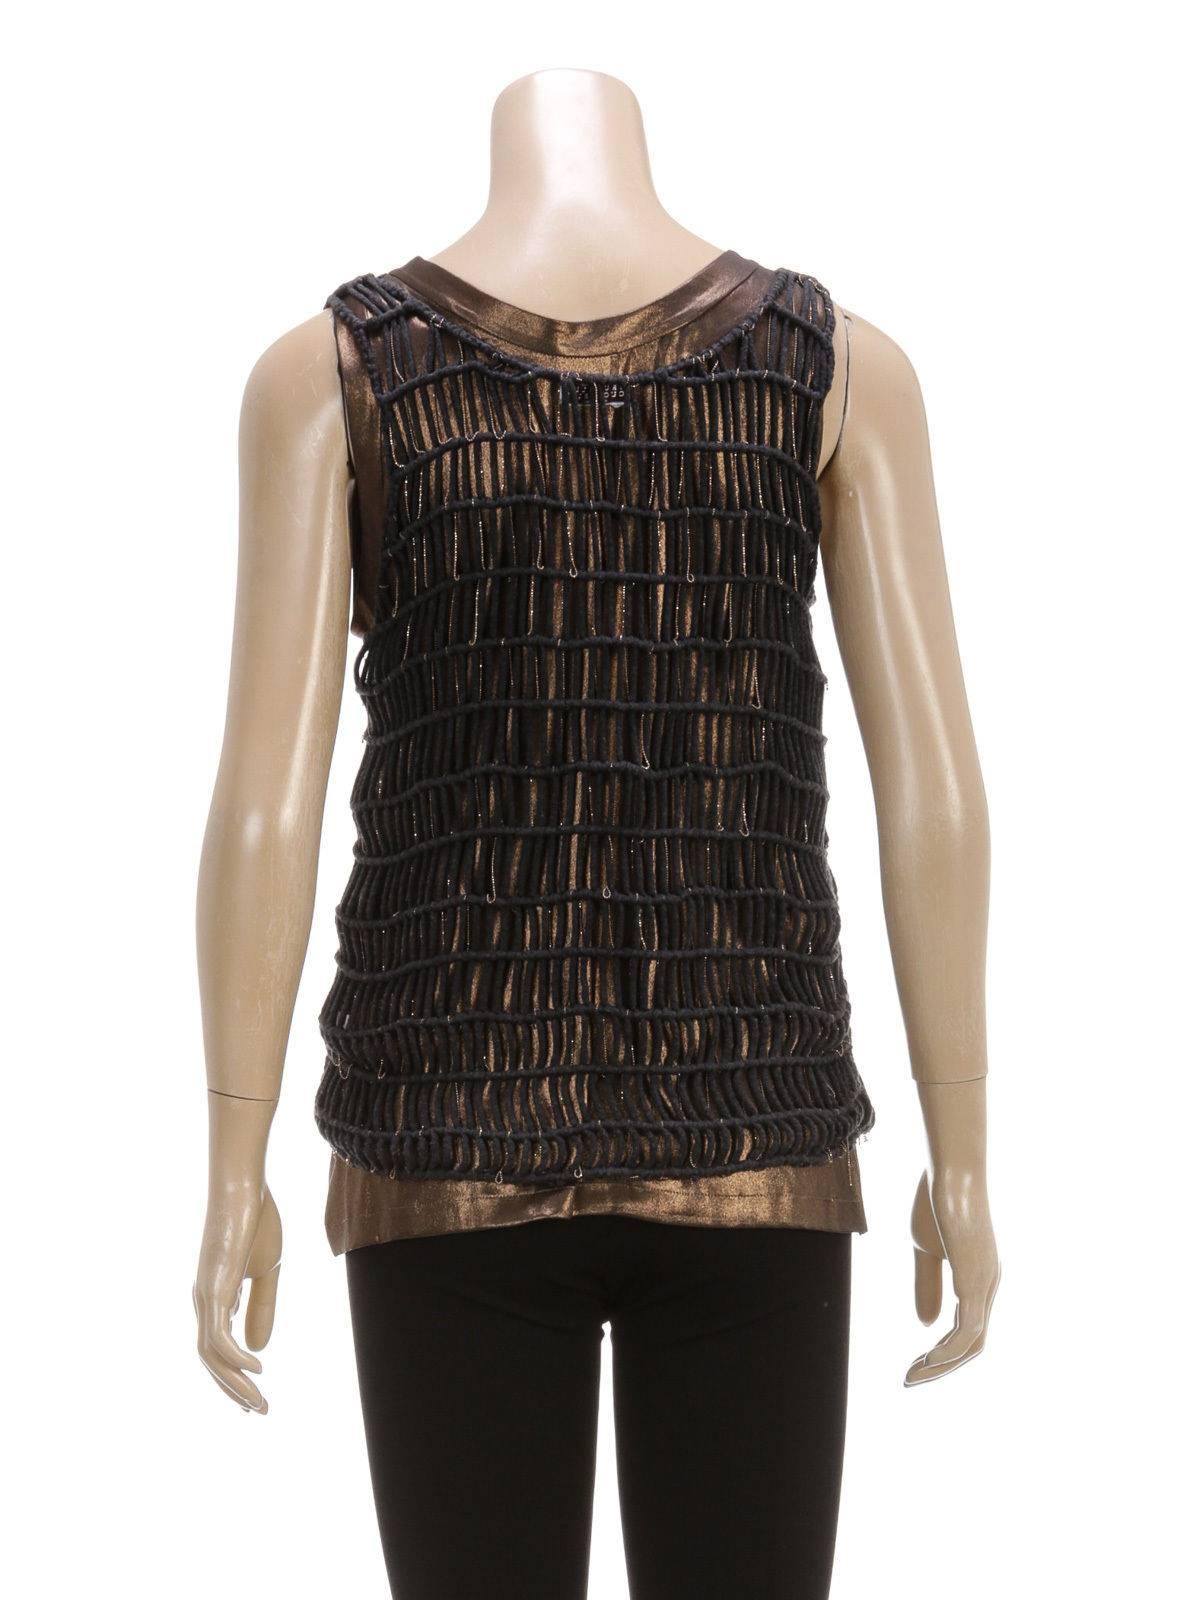 Brunello Cucinelli Bronze and Gray Knit Beaded Sleeveless Tank Top (Size M) For Sale 1